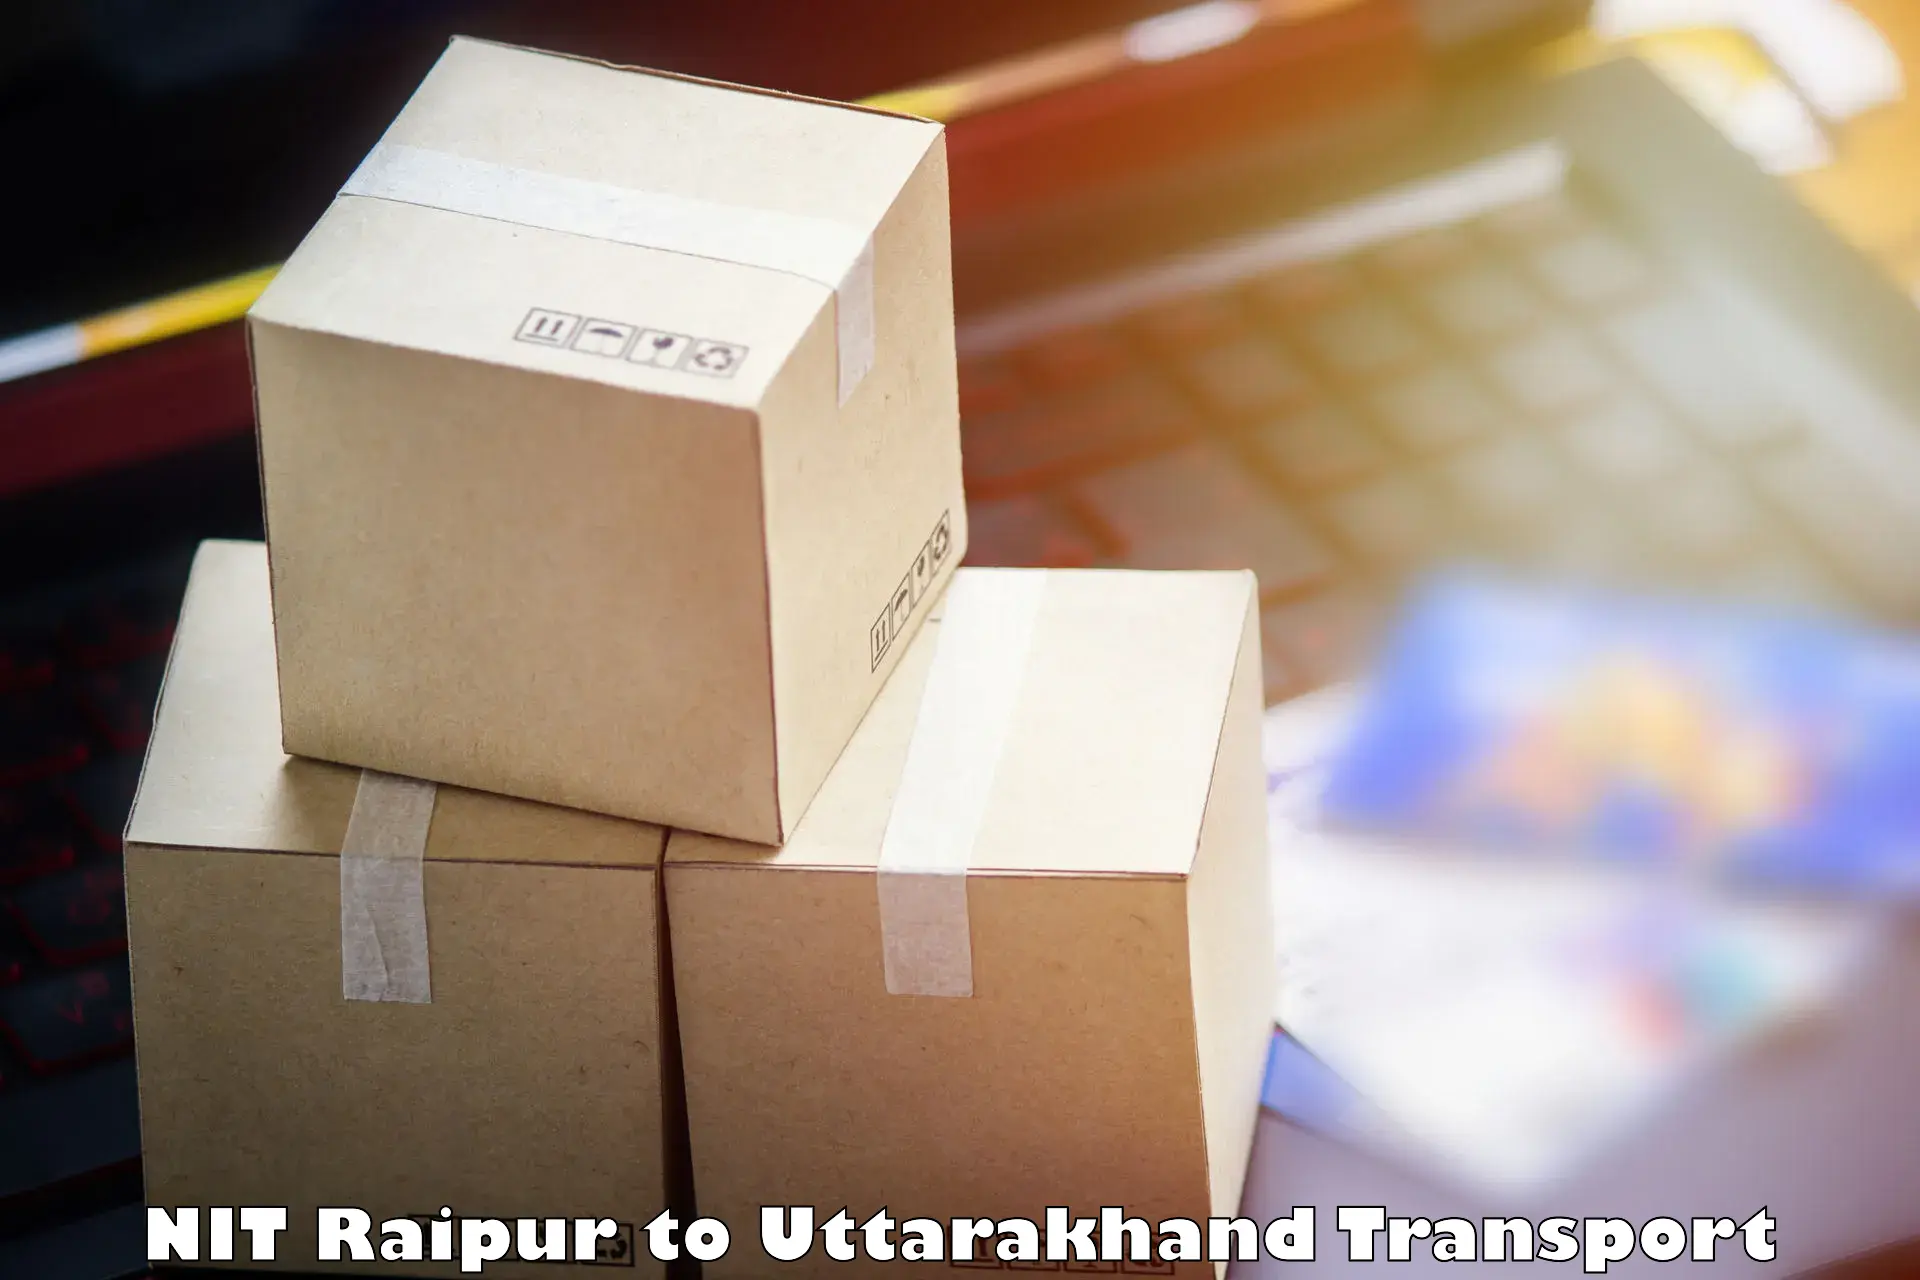 Transport shared services in NIT Raipur to Doiwala